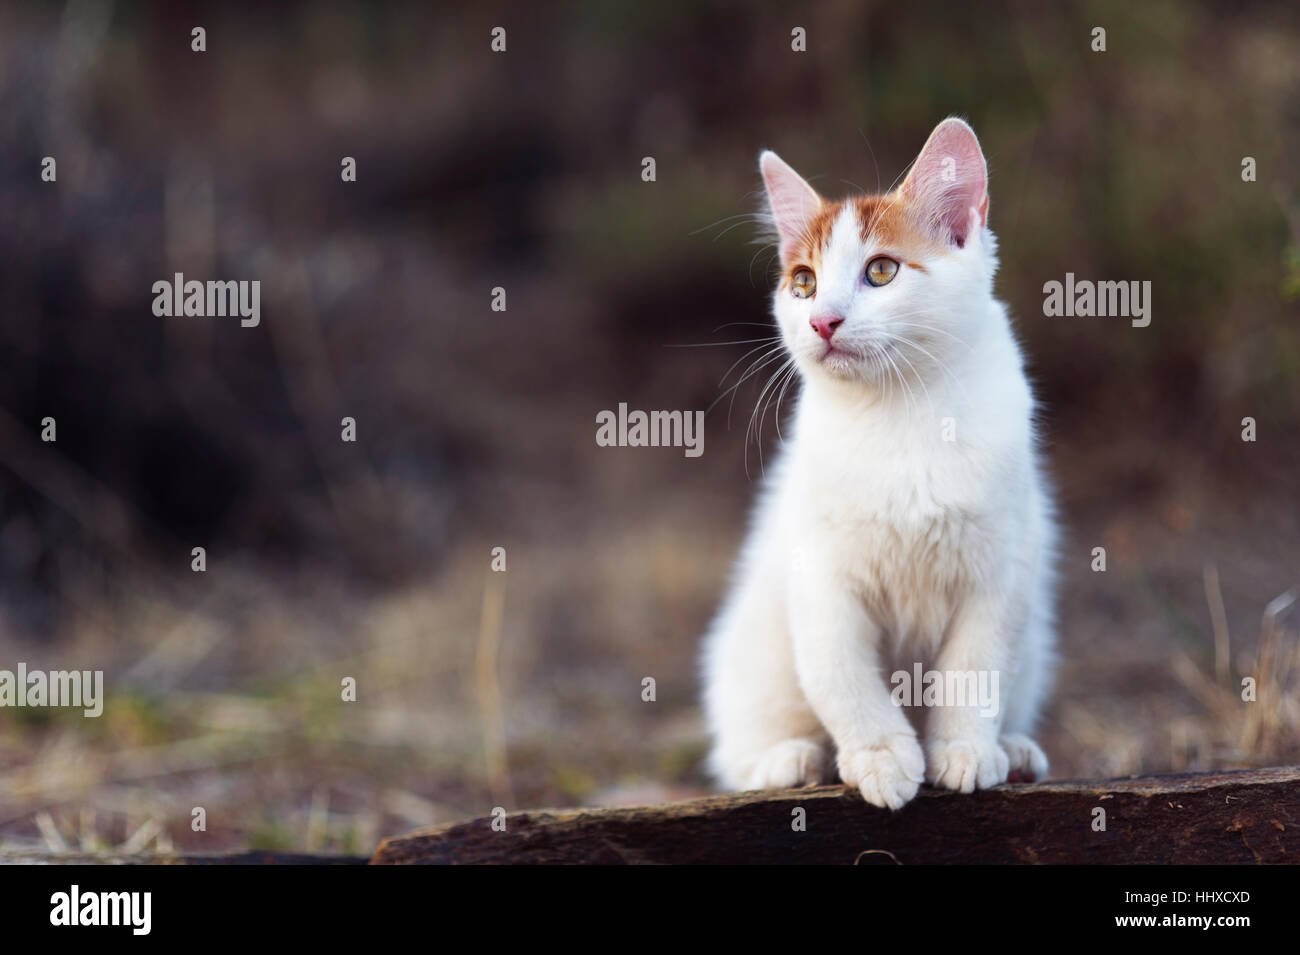 White and red kitten sitting outdoors Stock Photo